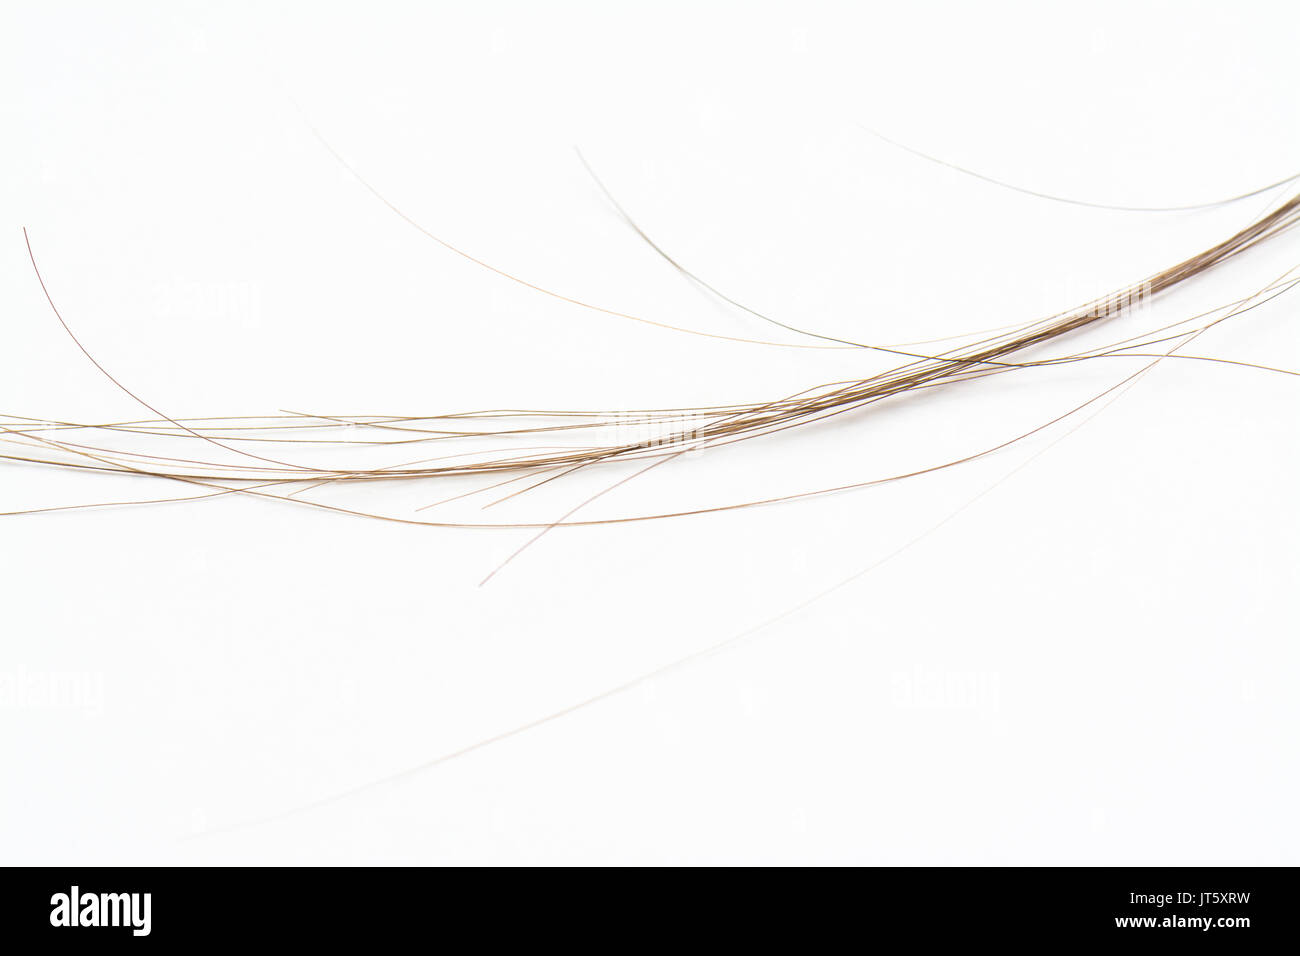 strands of human hair on white background Stock Photo